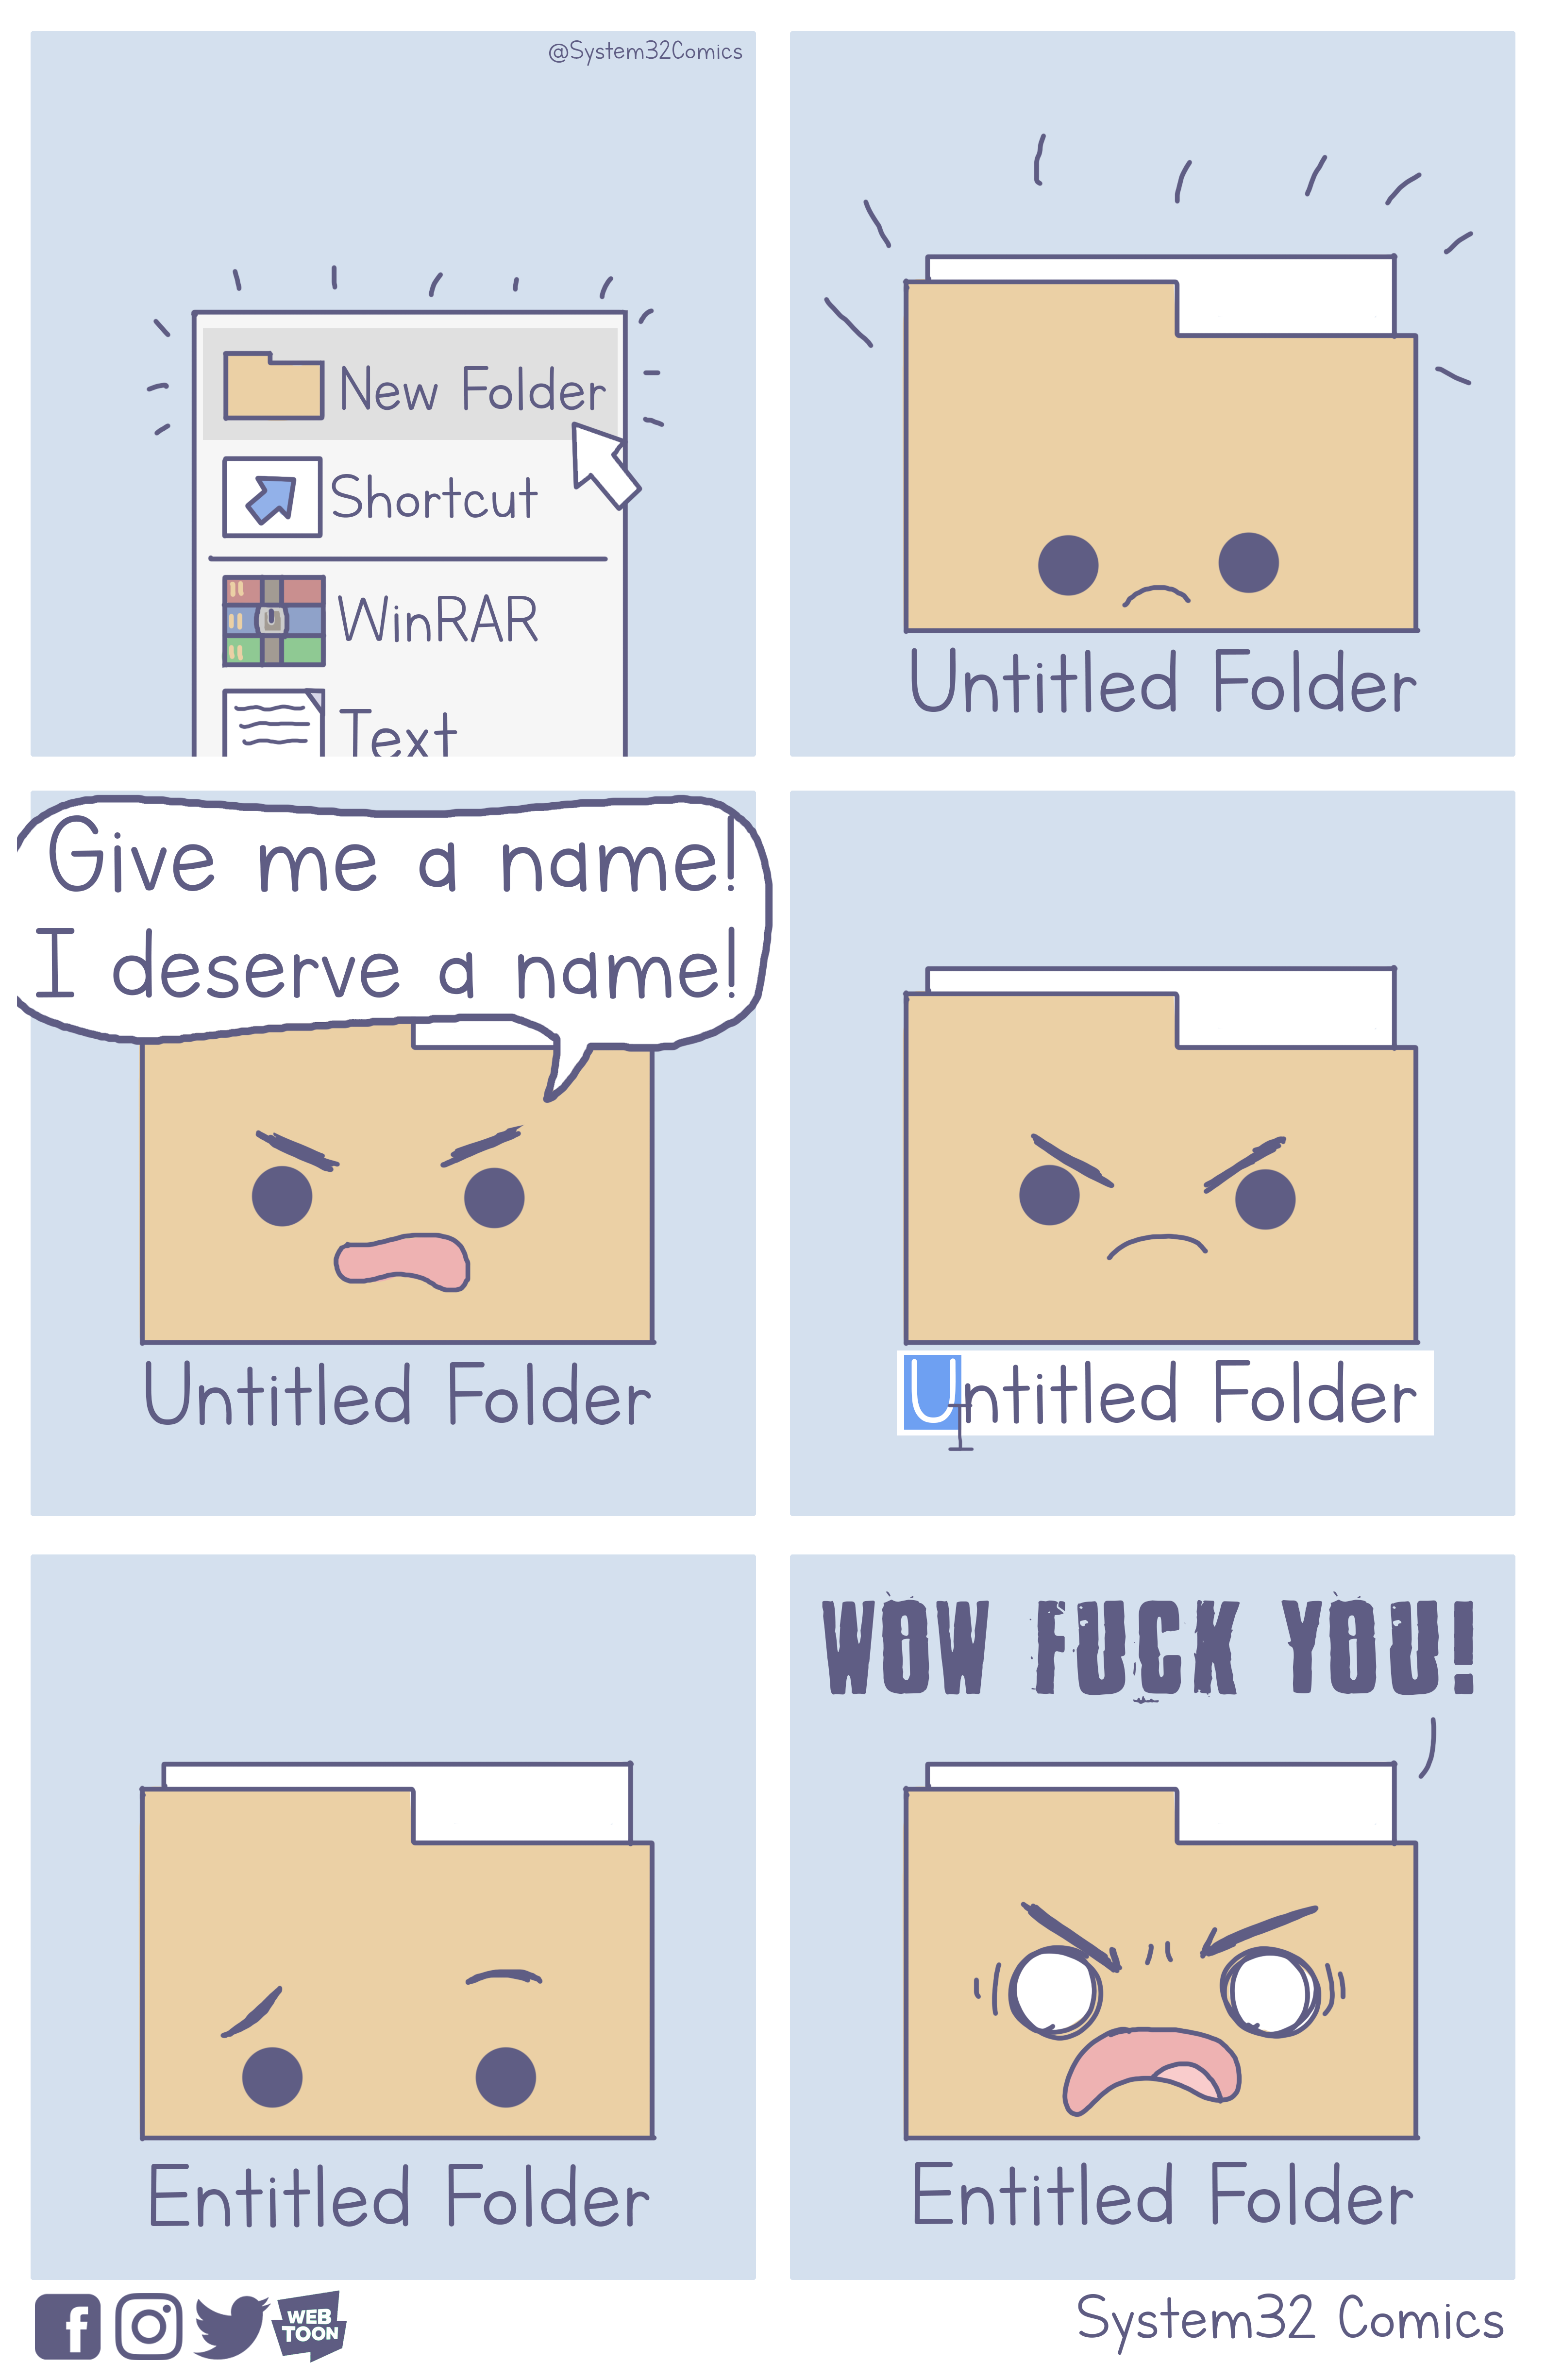 system32 comics - New Folder a Shortcut WinRAR Text Give me a name! I deserve a name! Untitled Folder Untitled Folder Untitled Folder Wow Fuck You! Entitled Folder Cov Entitled Folder System32 Comics